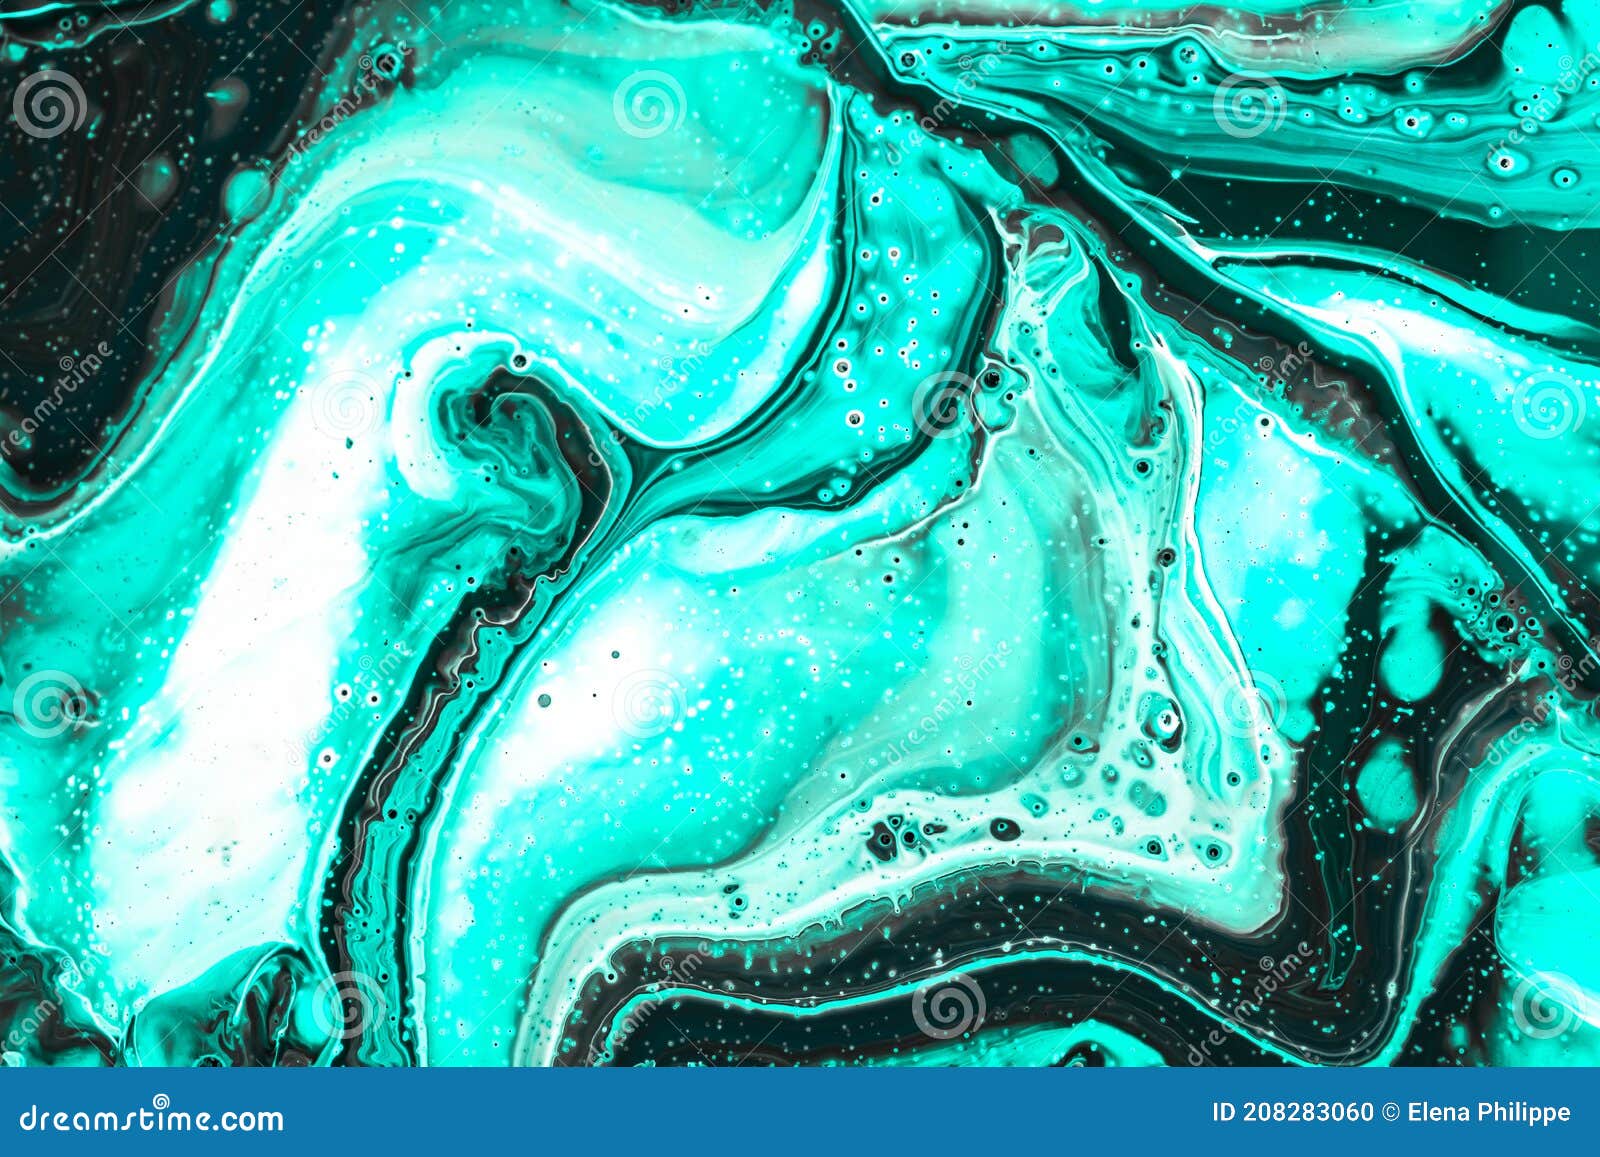 Blurred Focus. Acrylic Paints. Abstract Galaxy Marble Wallpaper. Beautiful  Mixed Blue, Azure and White Colors Stock Photo - Image of cosmic, background:  208283060